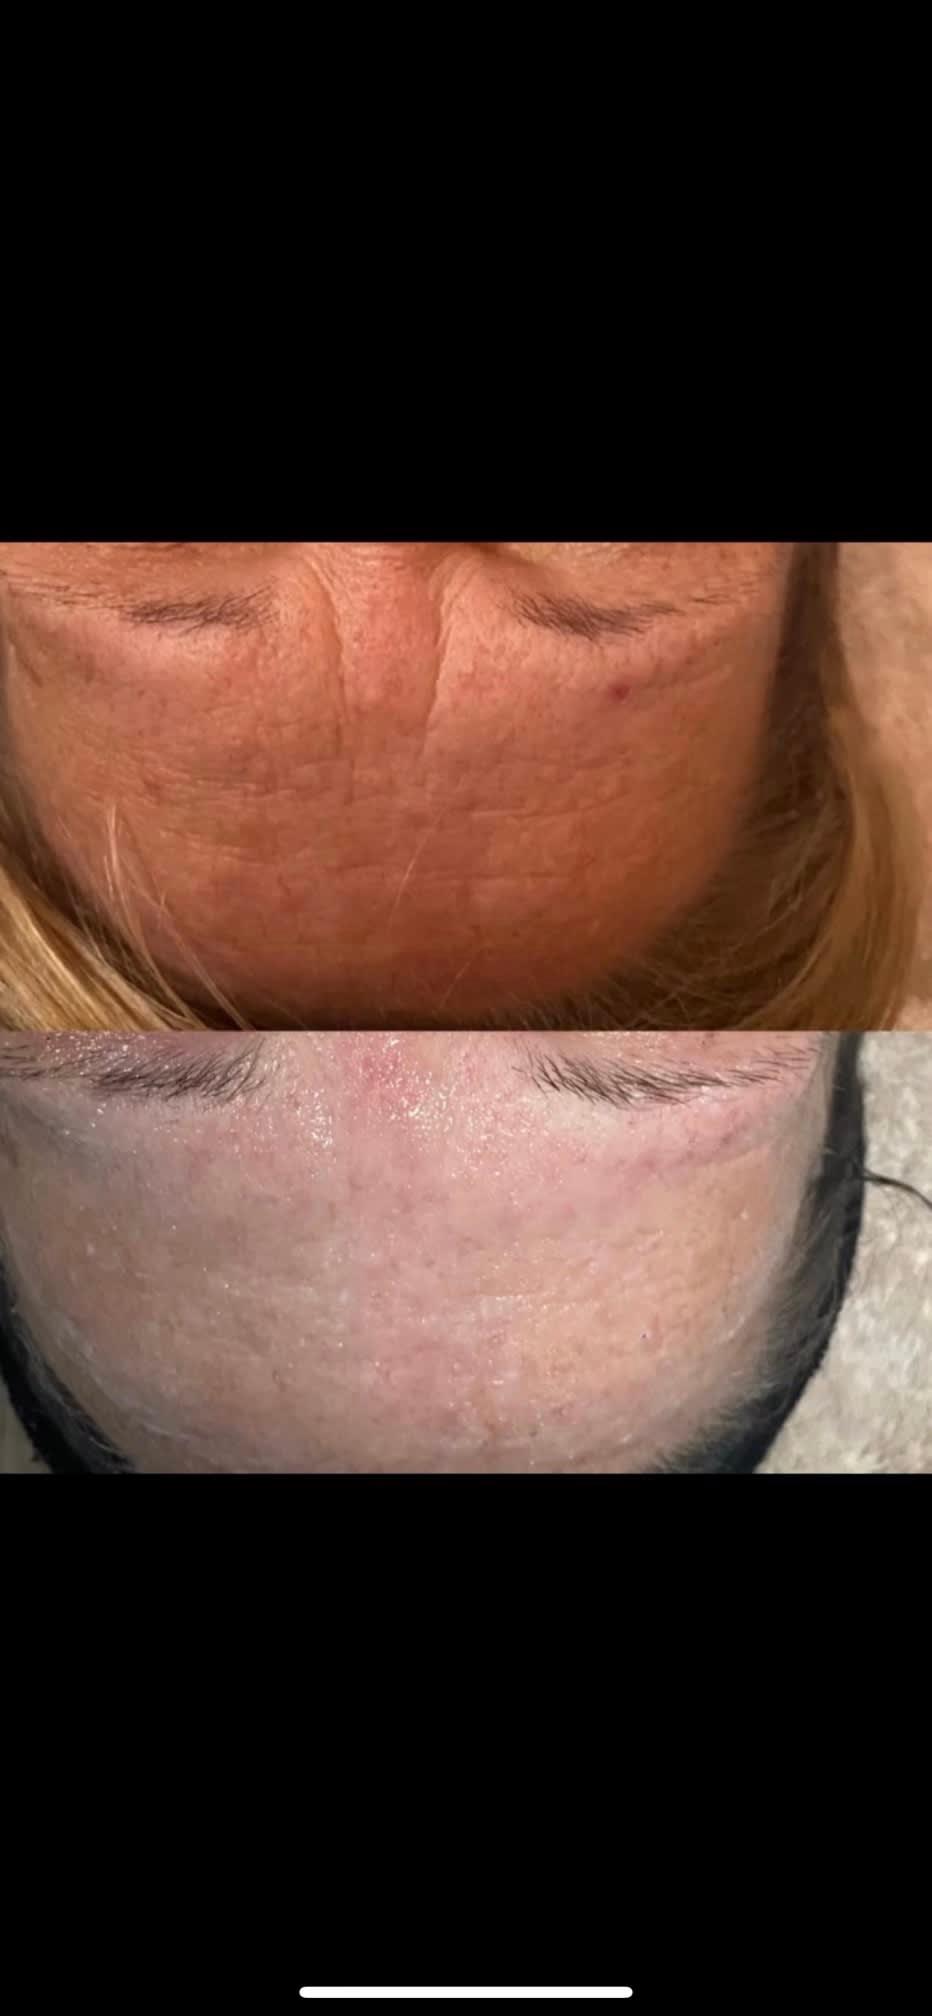 Images Cheshire Treatments